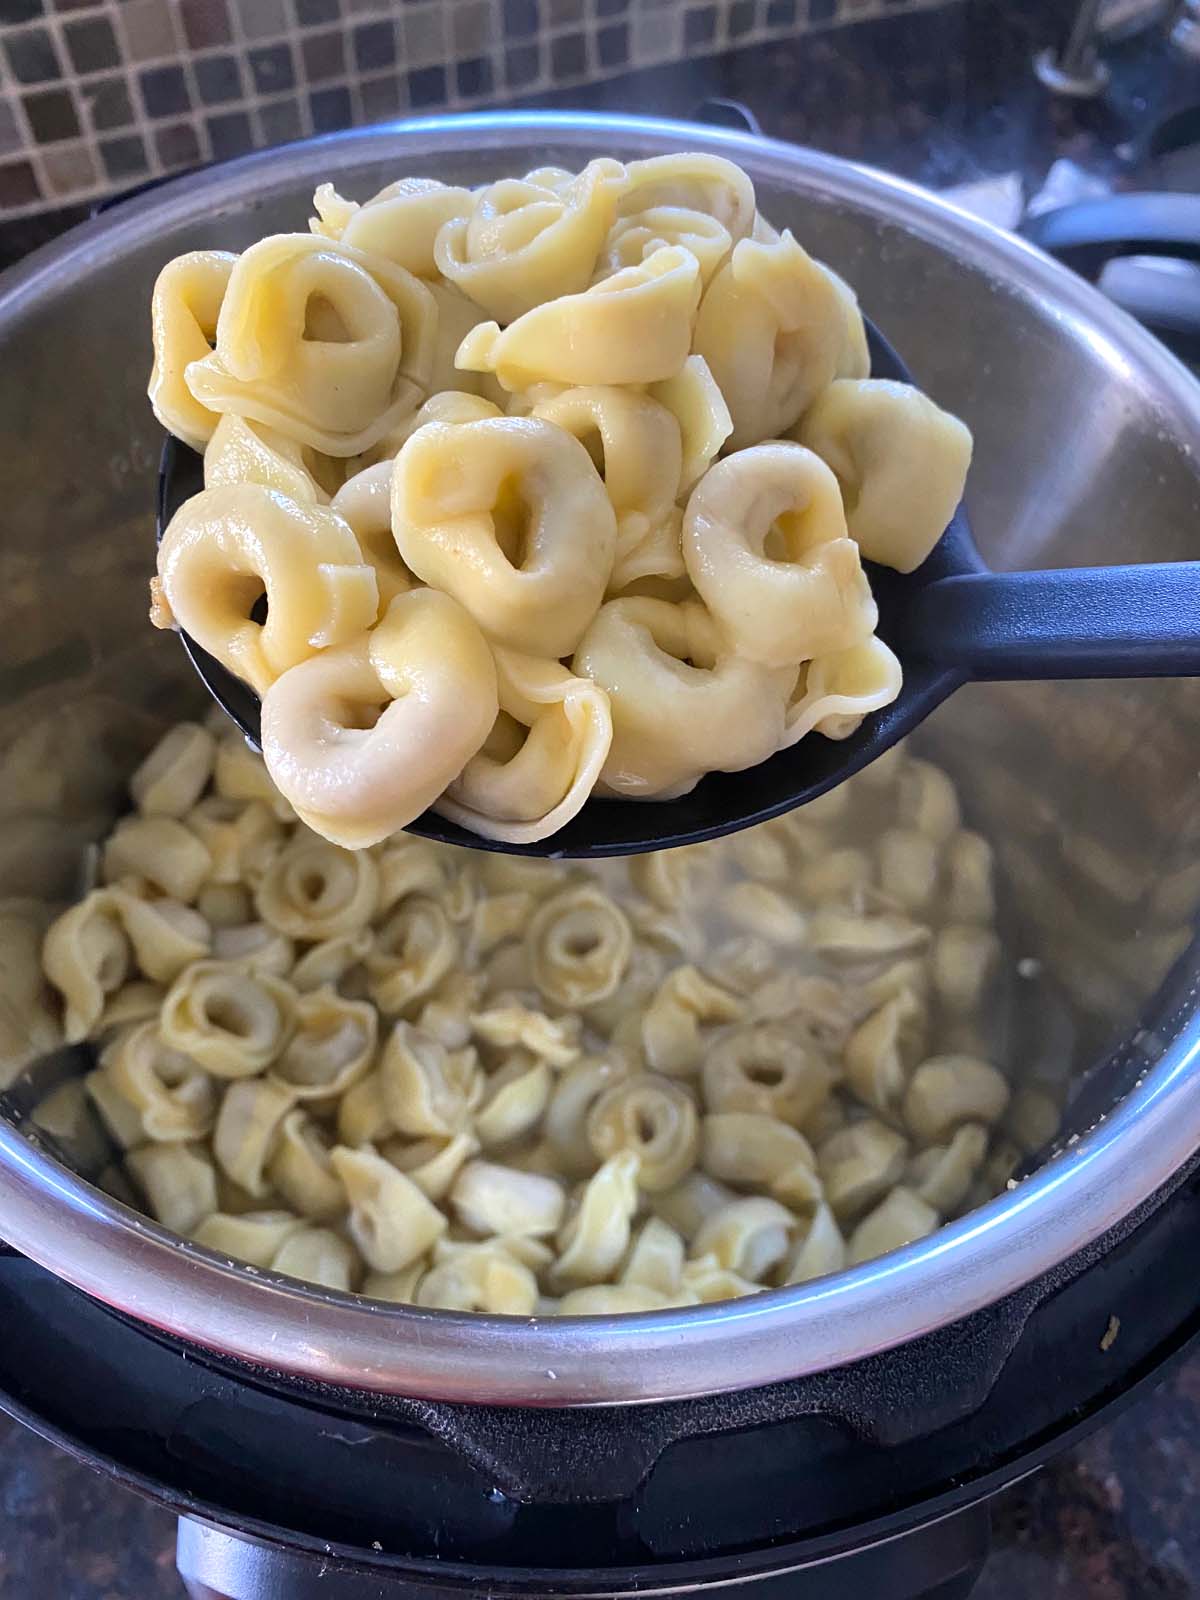 A spoon of cooked tortellini being held over an instant pot full of cooked tortellini.